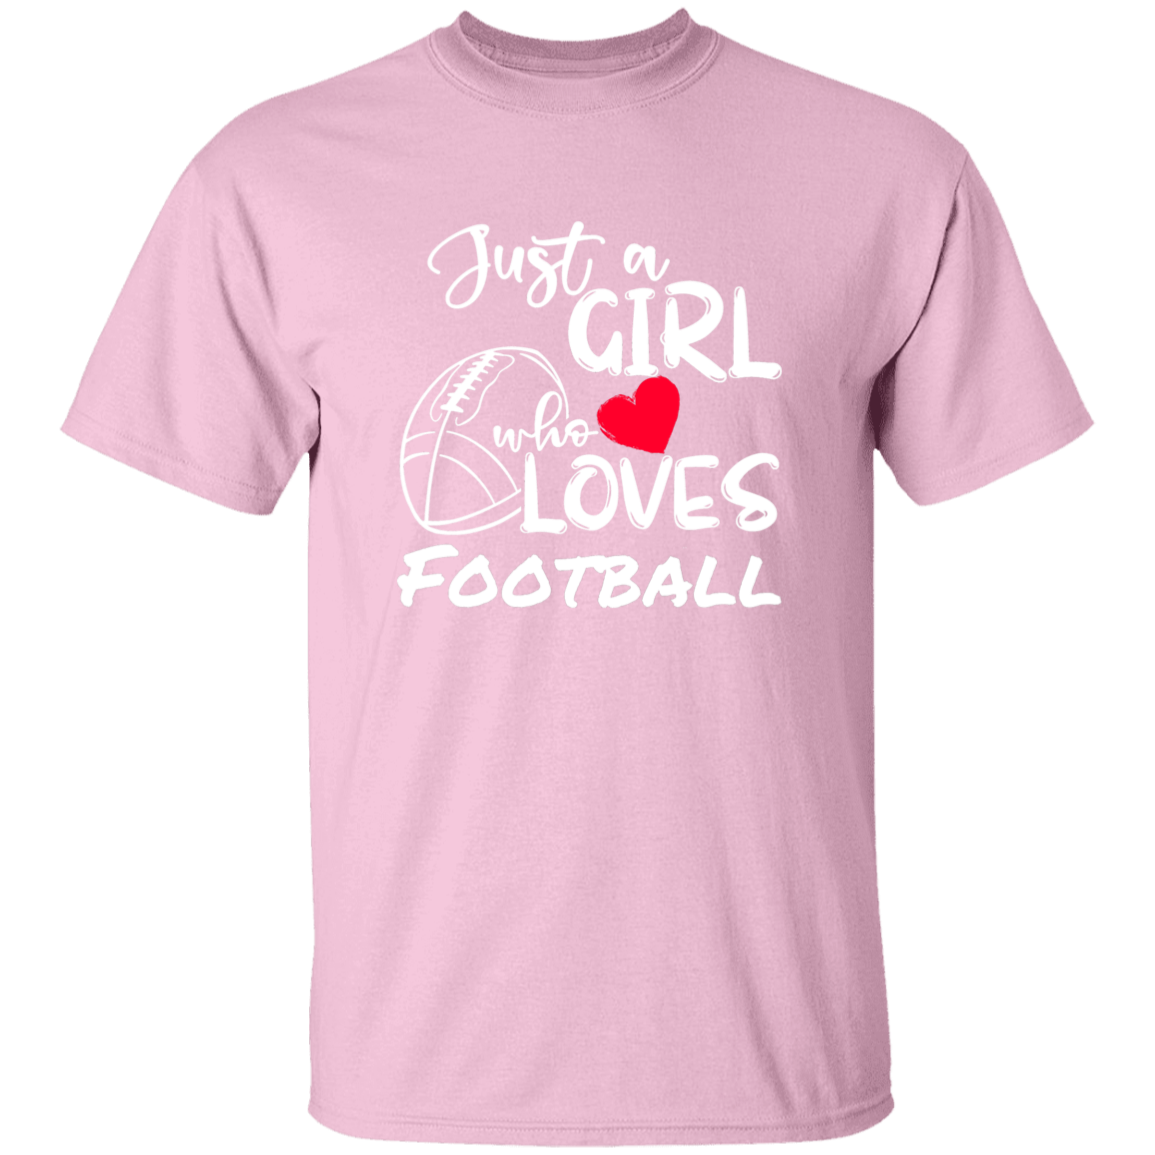 Just a Girl who Loves Football-T-Shirt